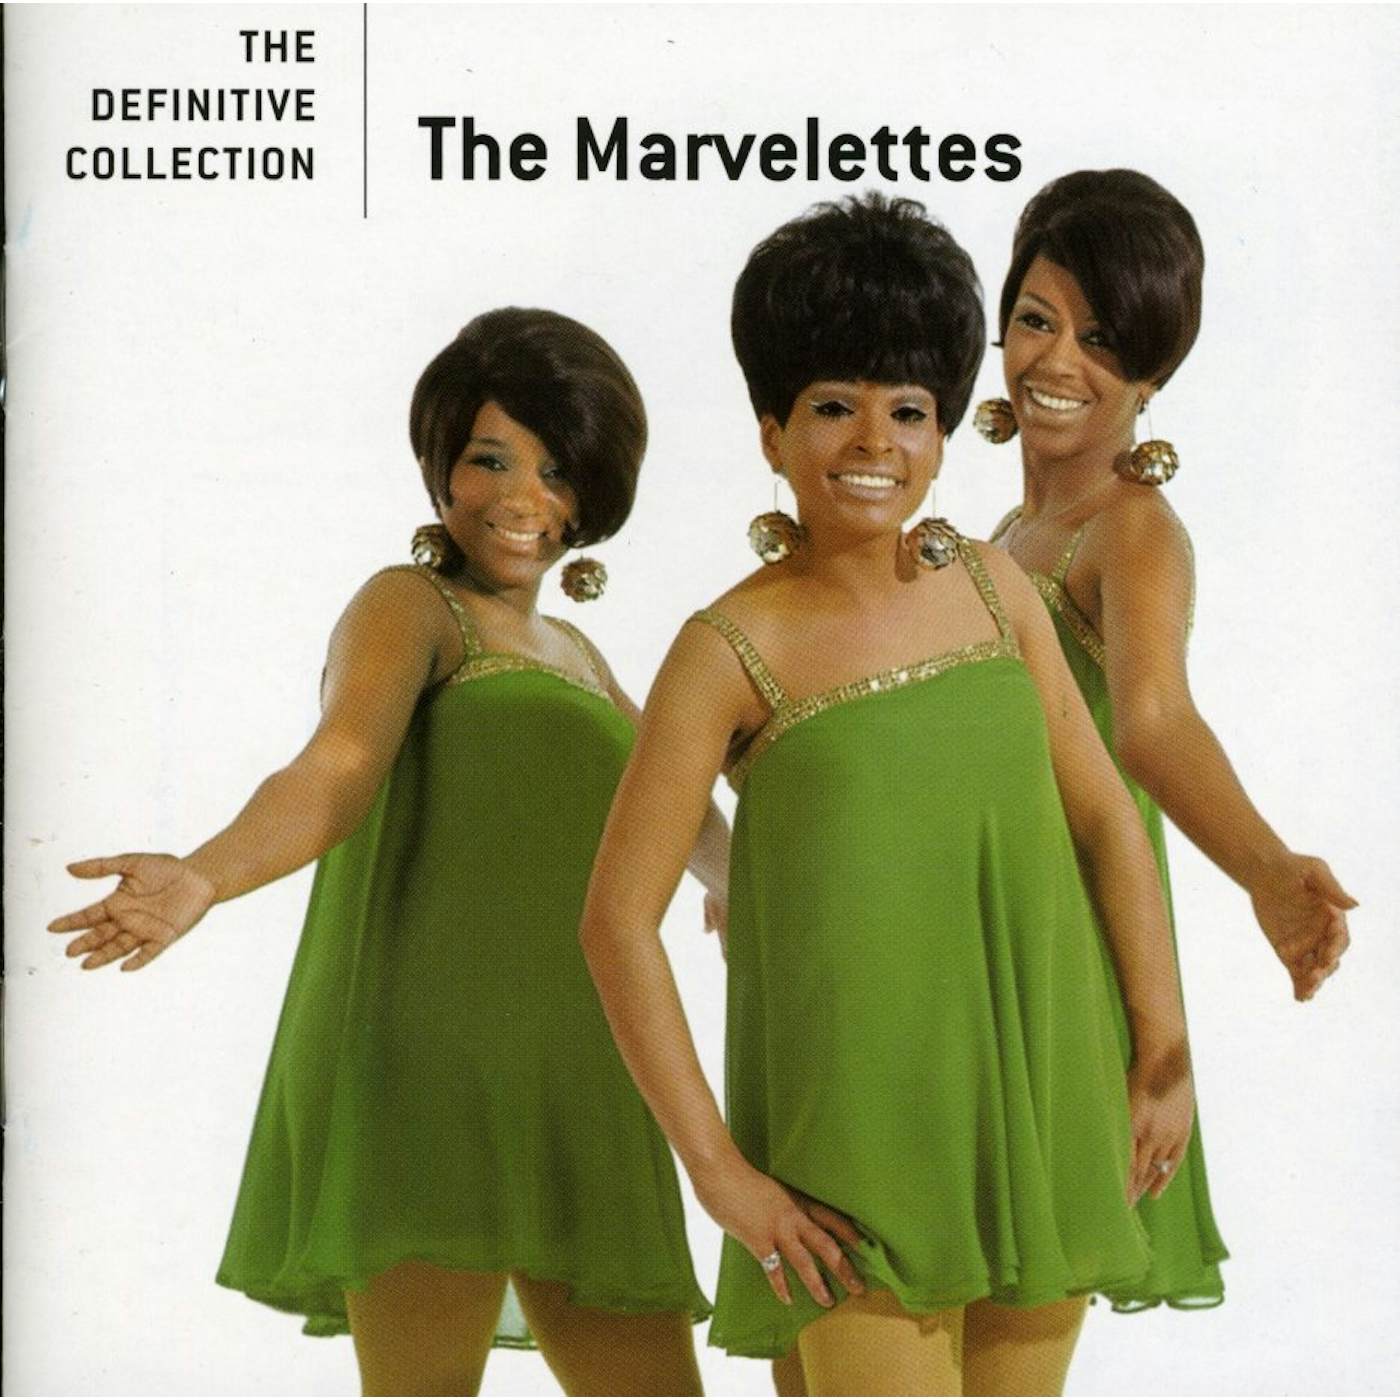 The Marvelettes DEFINITIVE COLLECTION CD